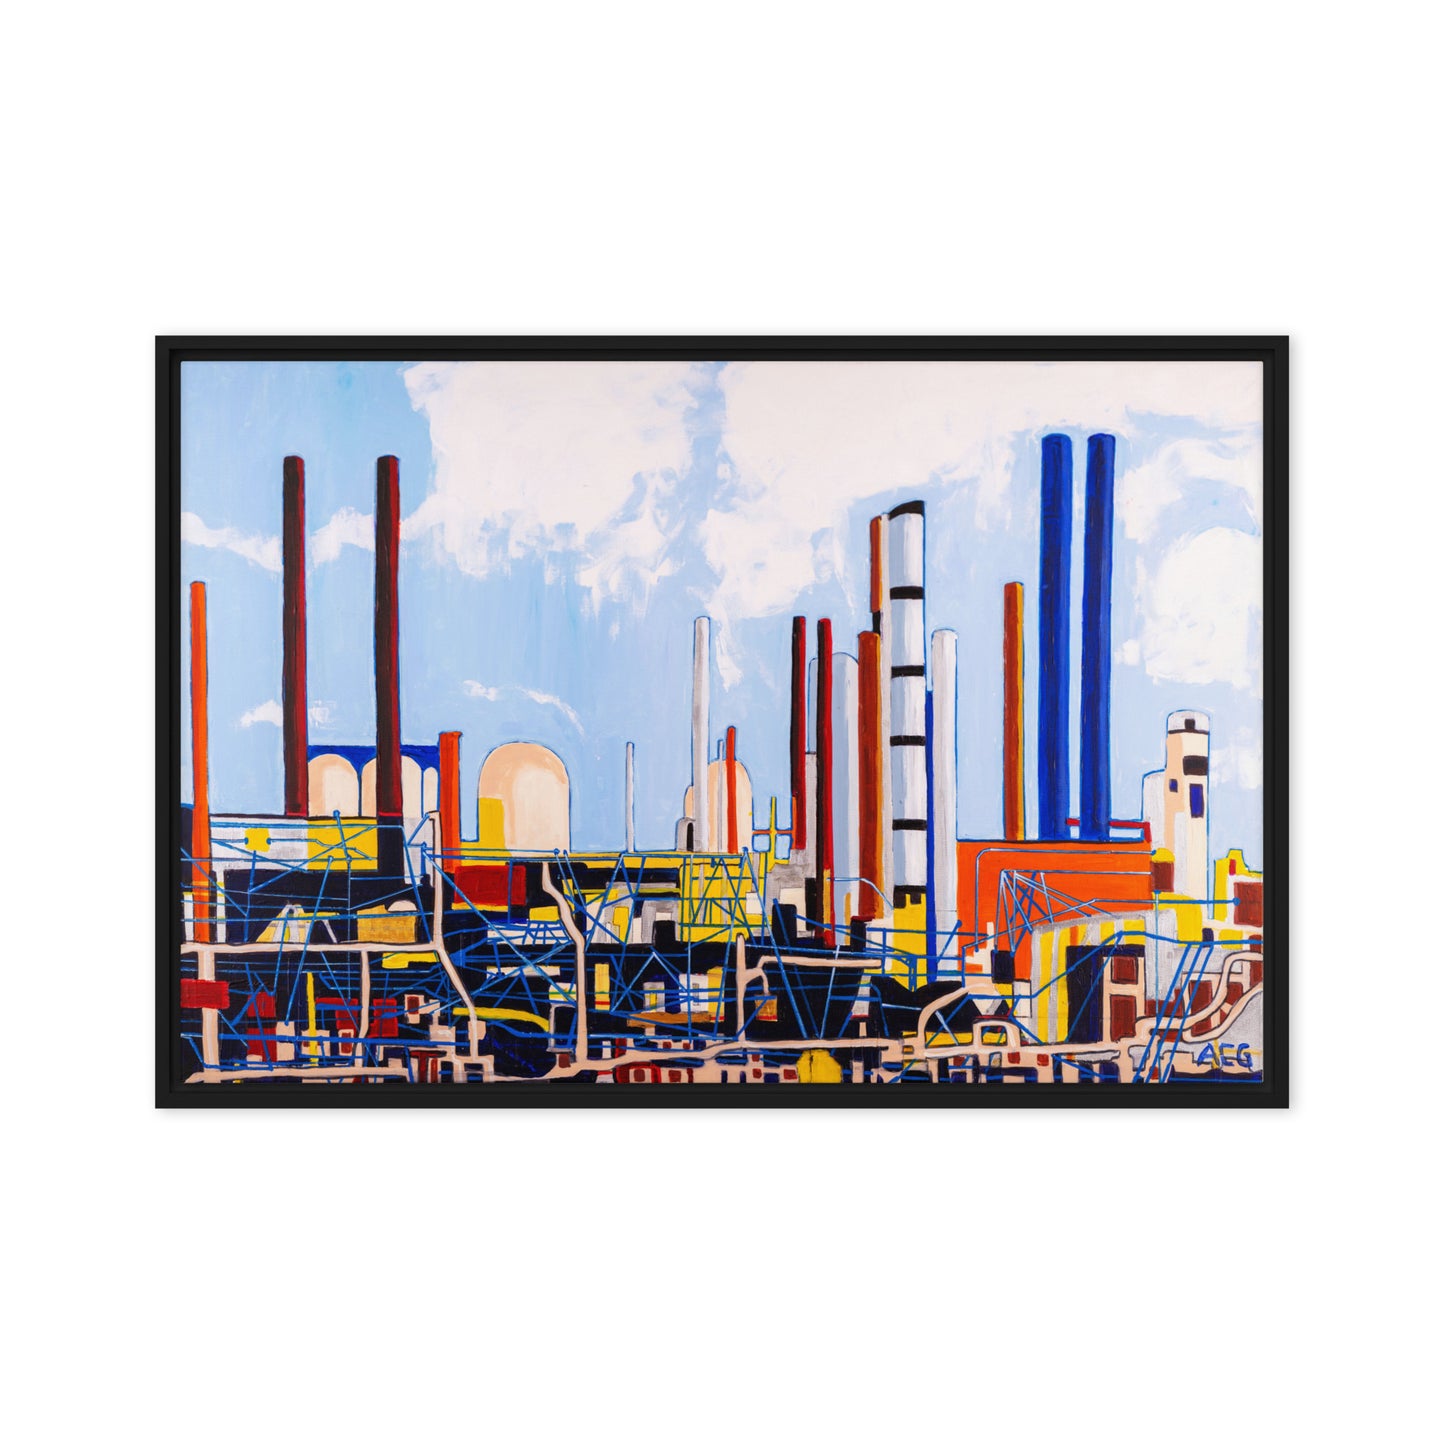 Refinery in Bright Daylight- Framed canvas